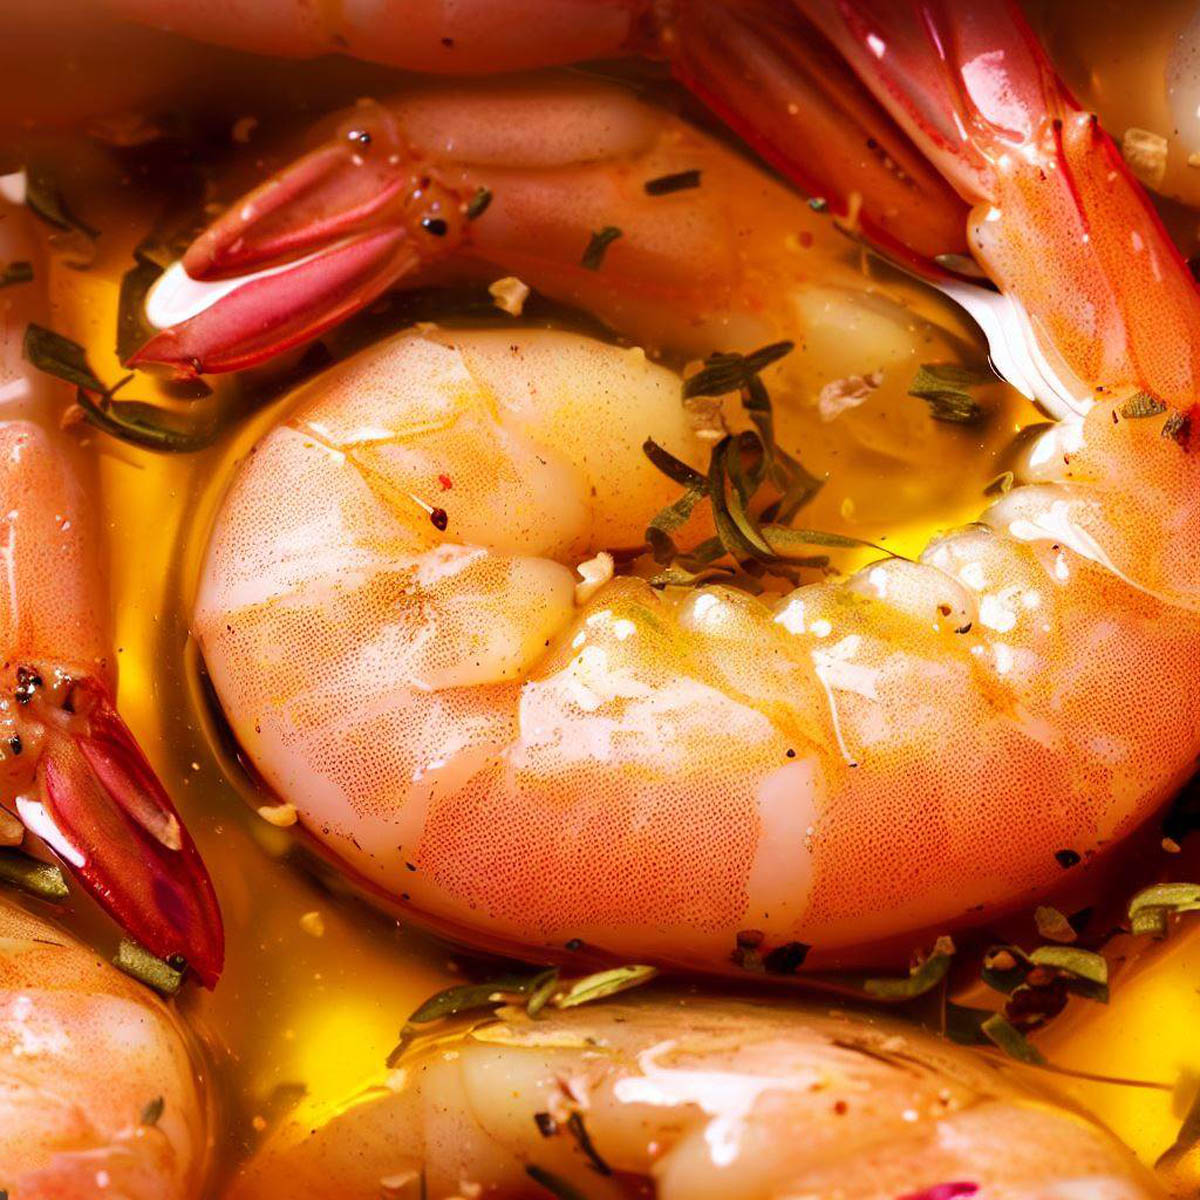 Shrimp soaking in a rich, zesty marinade for Texas Roadhouse grilled shrimp recipe